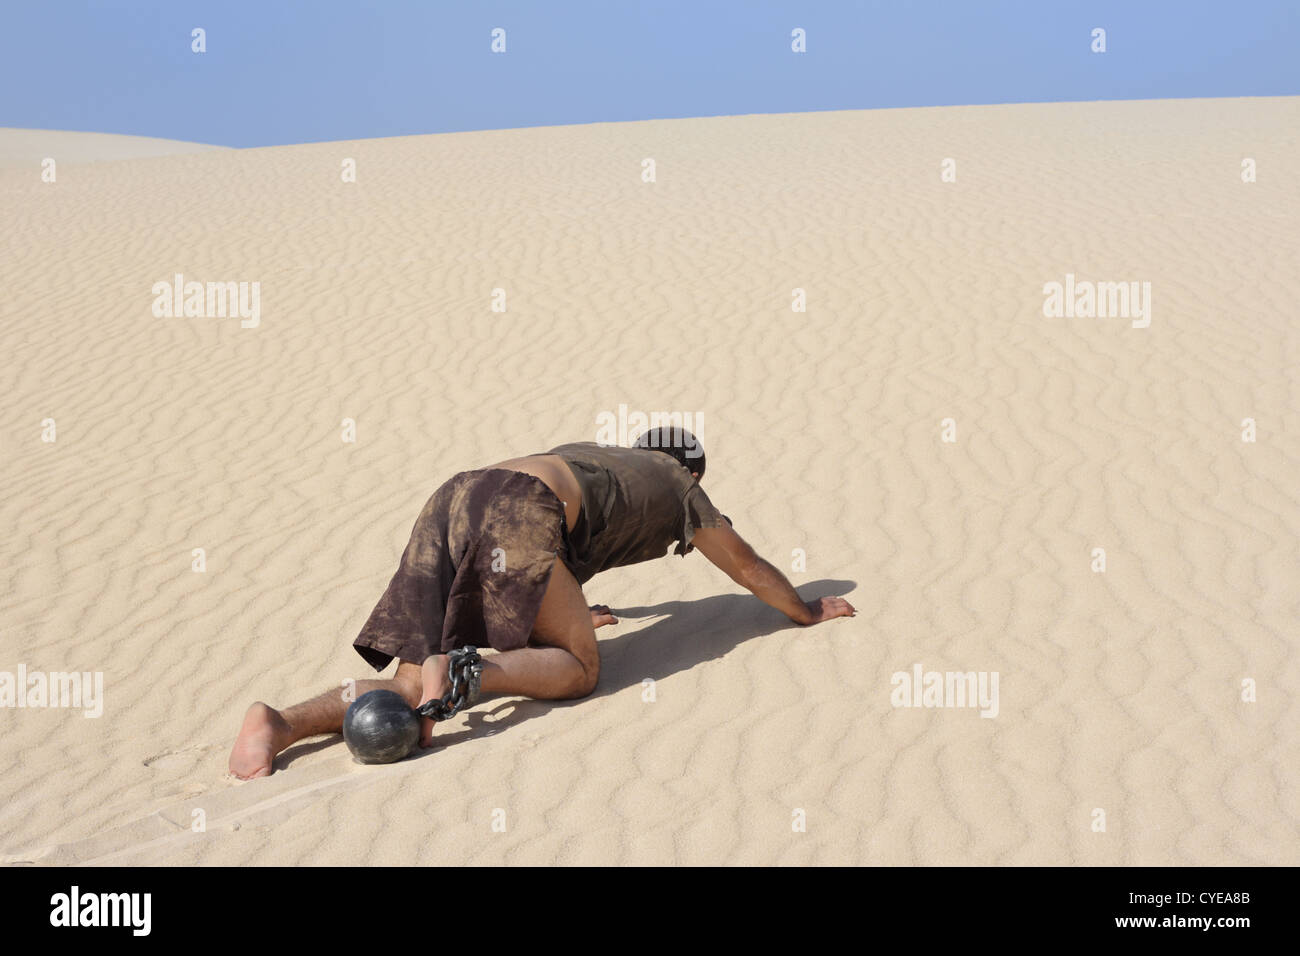 Man crawling in desert, hard and burdensome concept Stock Photo